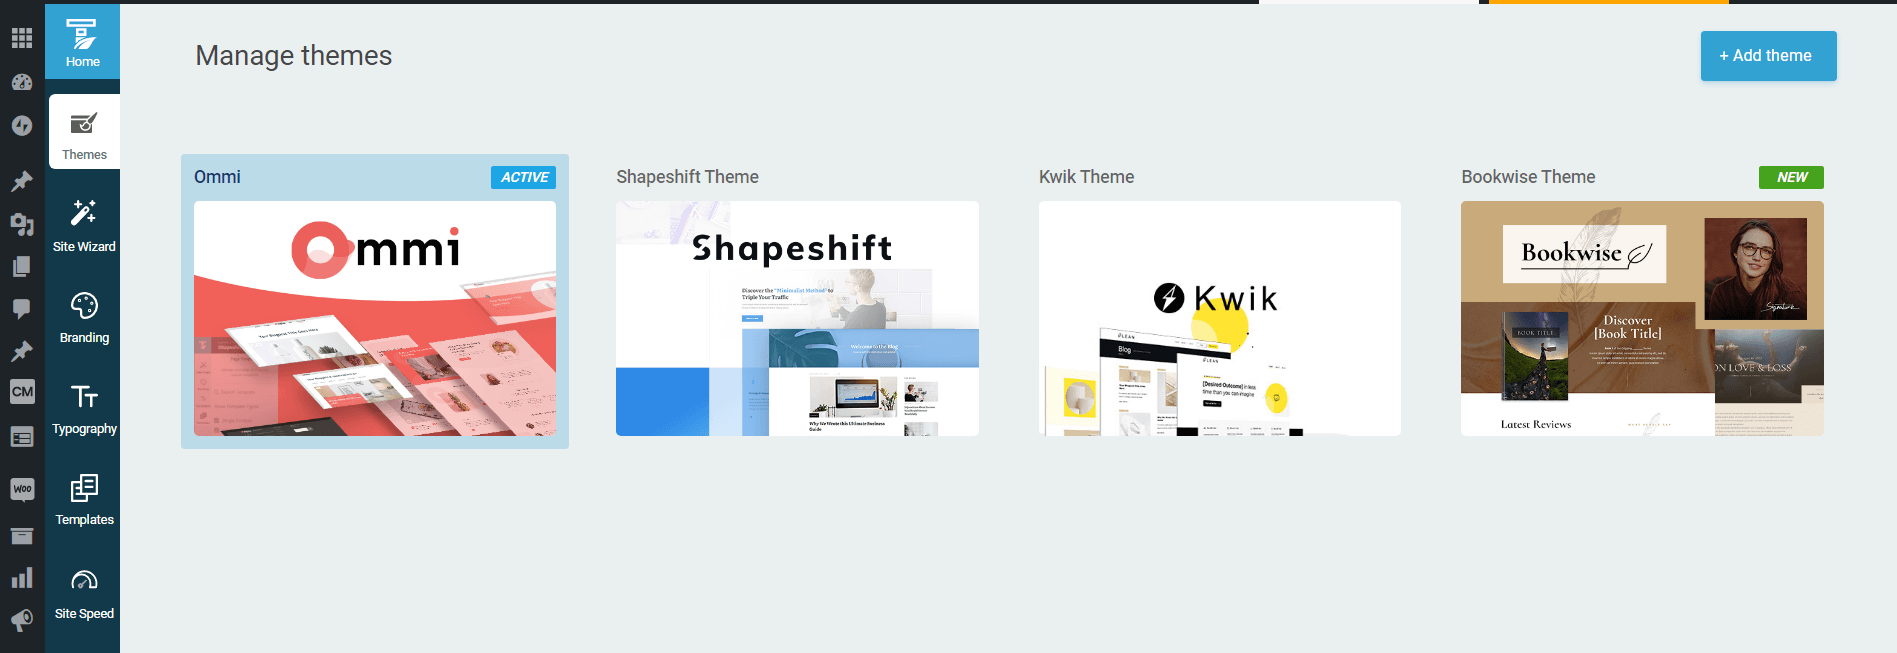 Snapshot of selecting a theme in the Thrive Theme Builder plugin